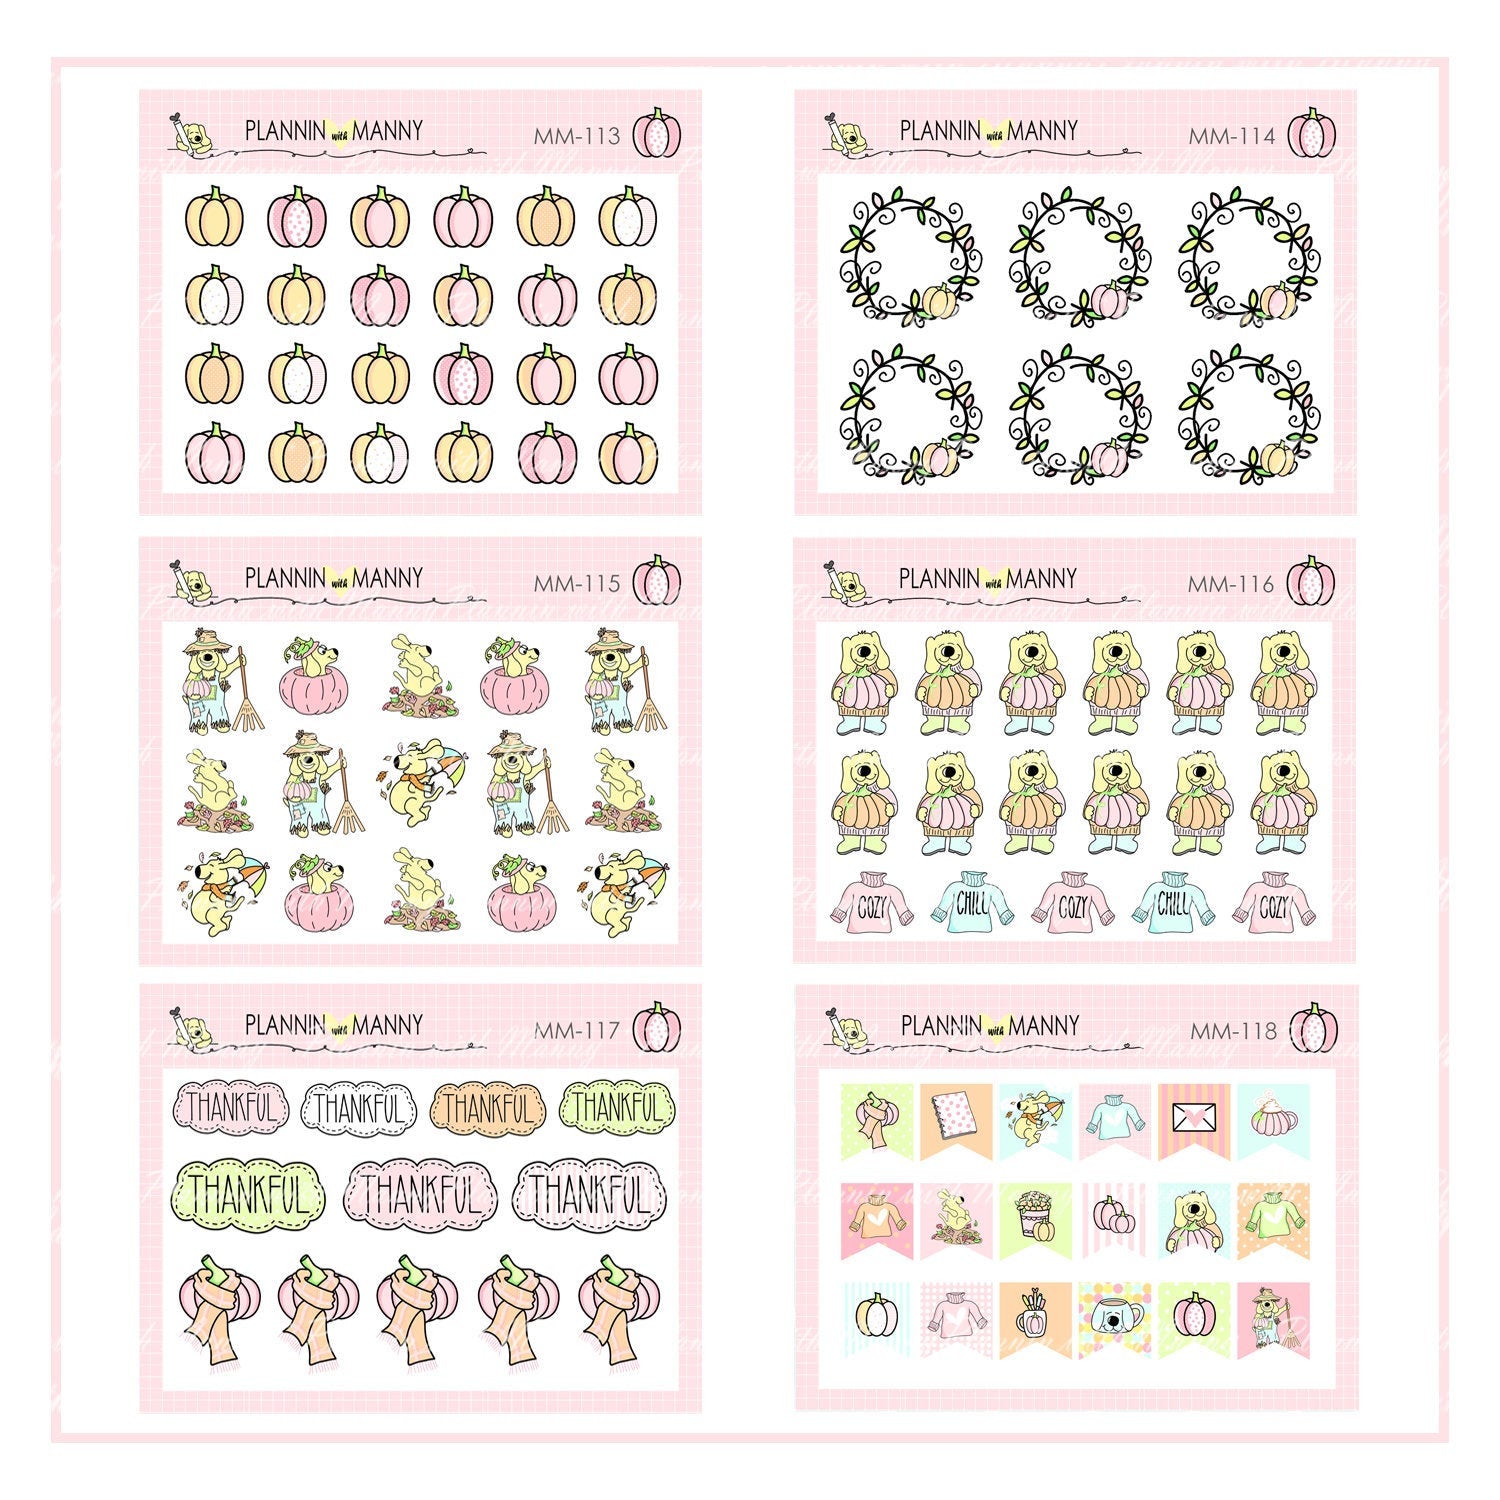 mm113 - mm118 MICRO Pretty in Pink Fall Collection Planner Sticker Set